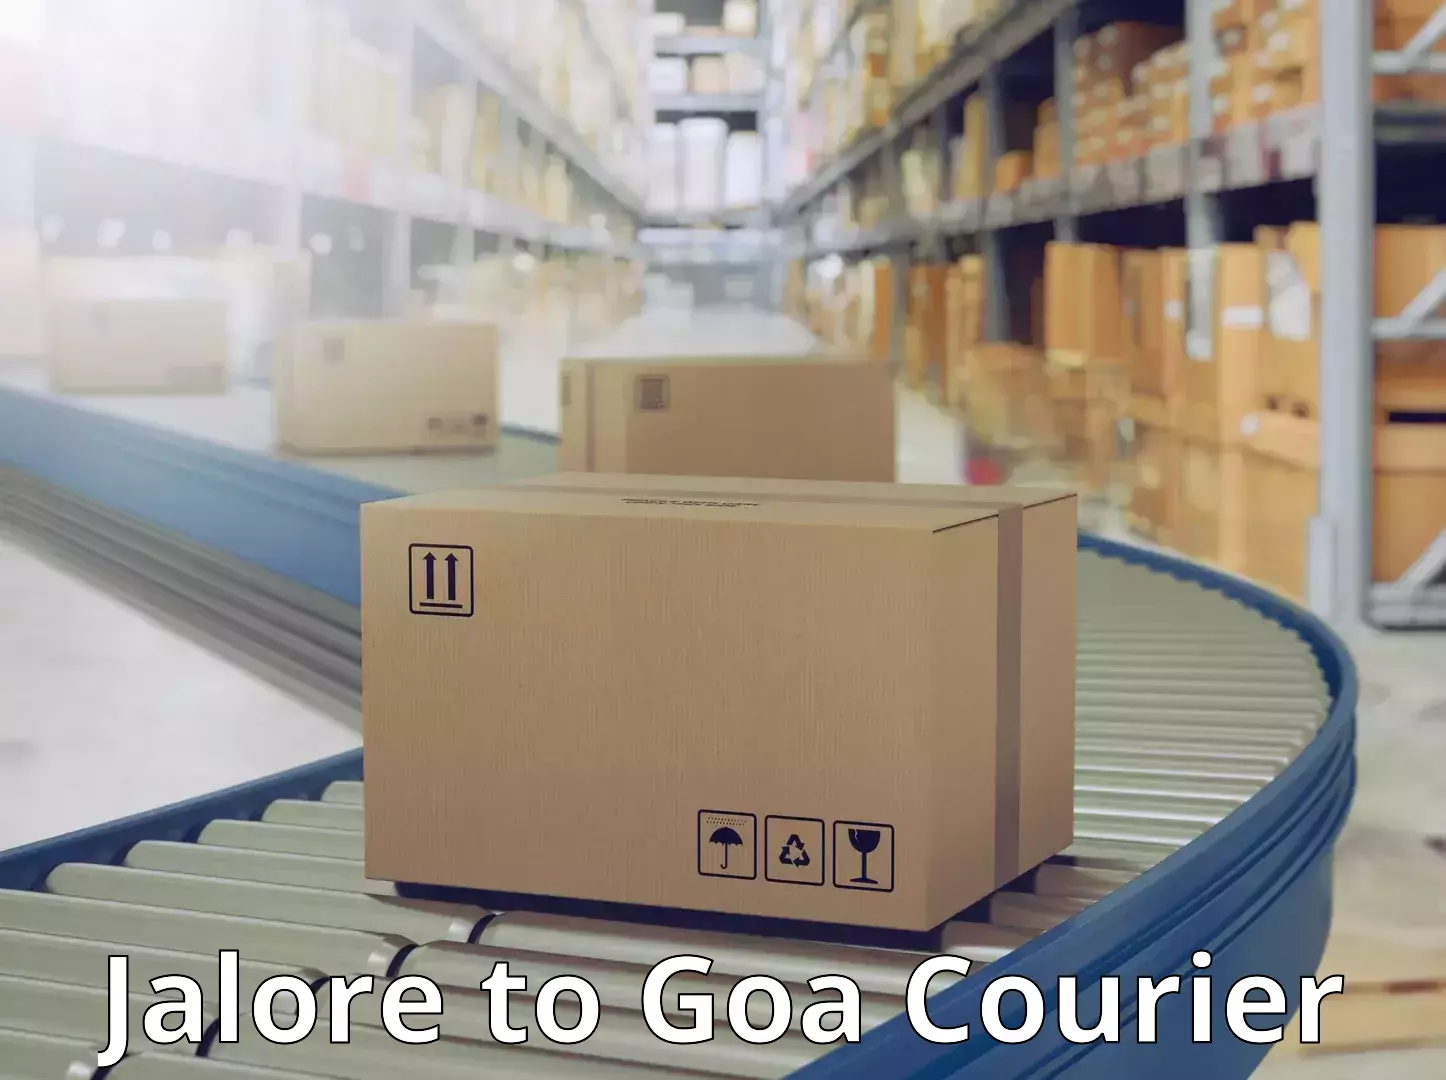 State-of-the-art courier technology in Jalore to Vasco da Gama